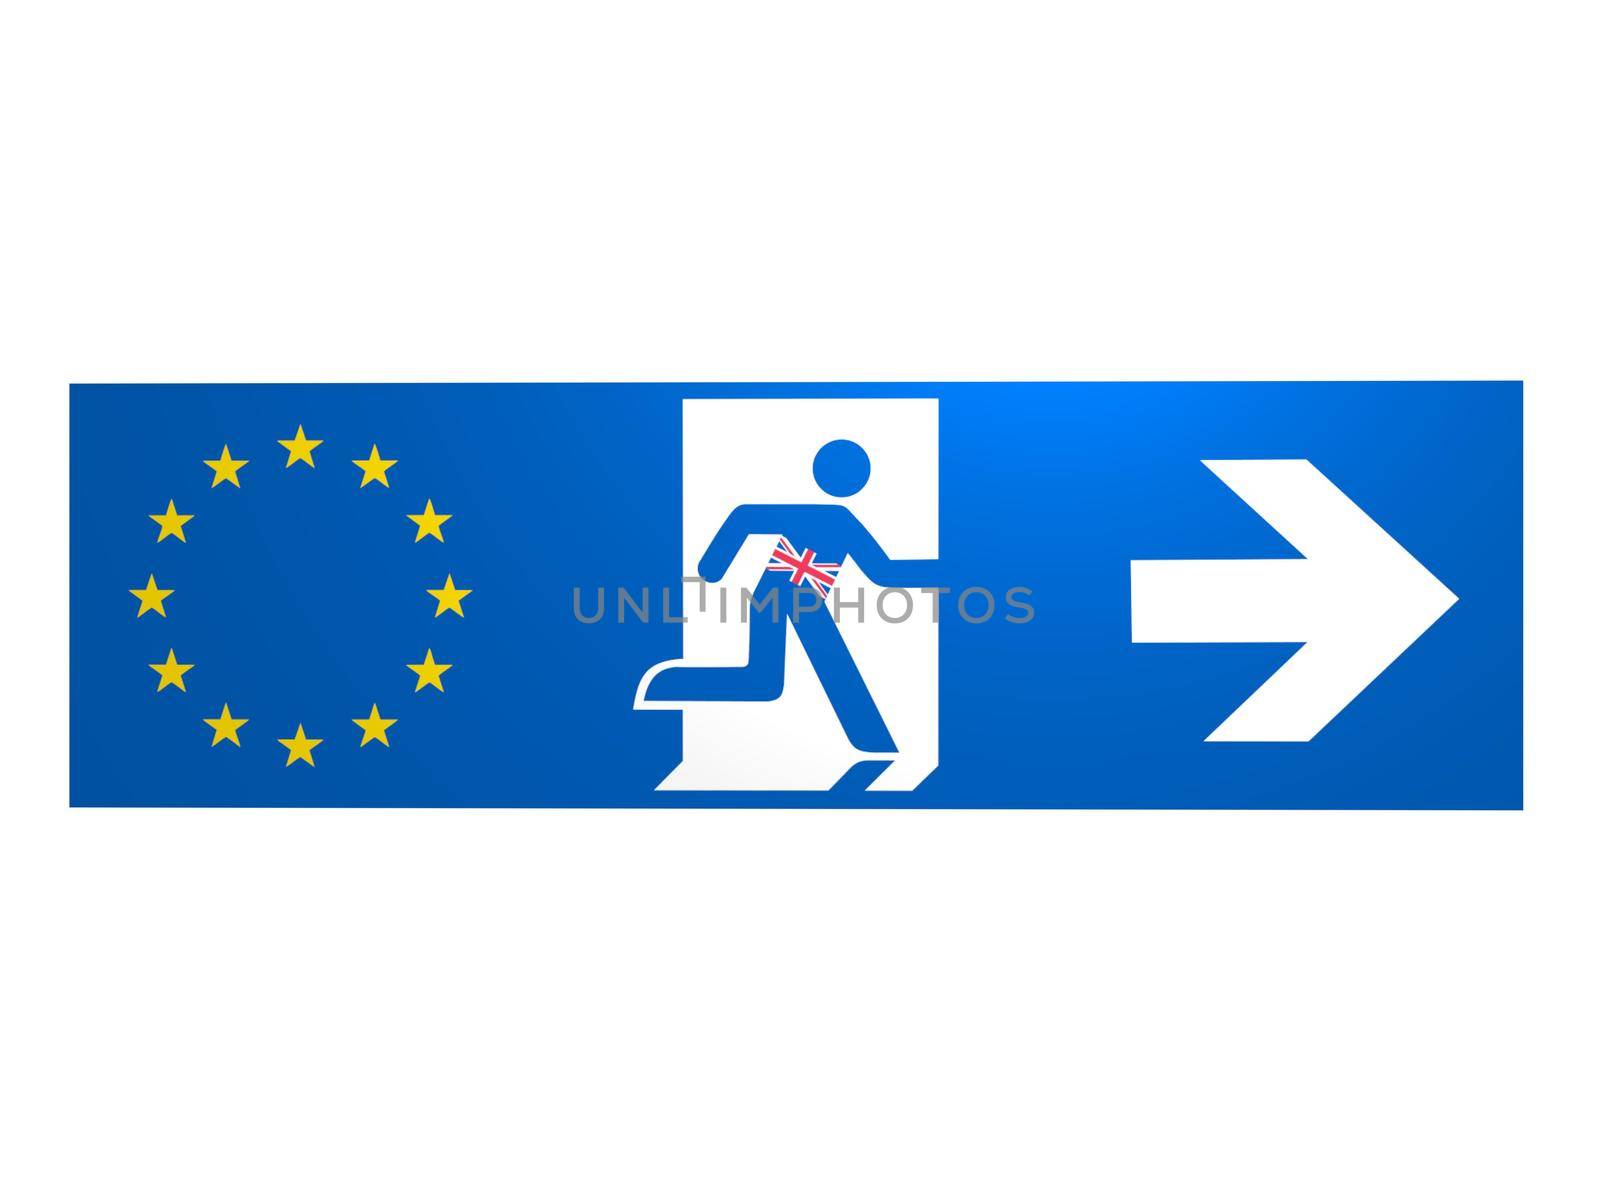 blue and brexit europe logo on white background - 3d rendering